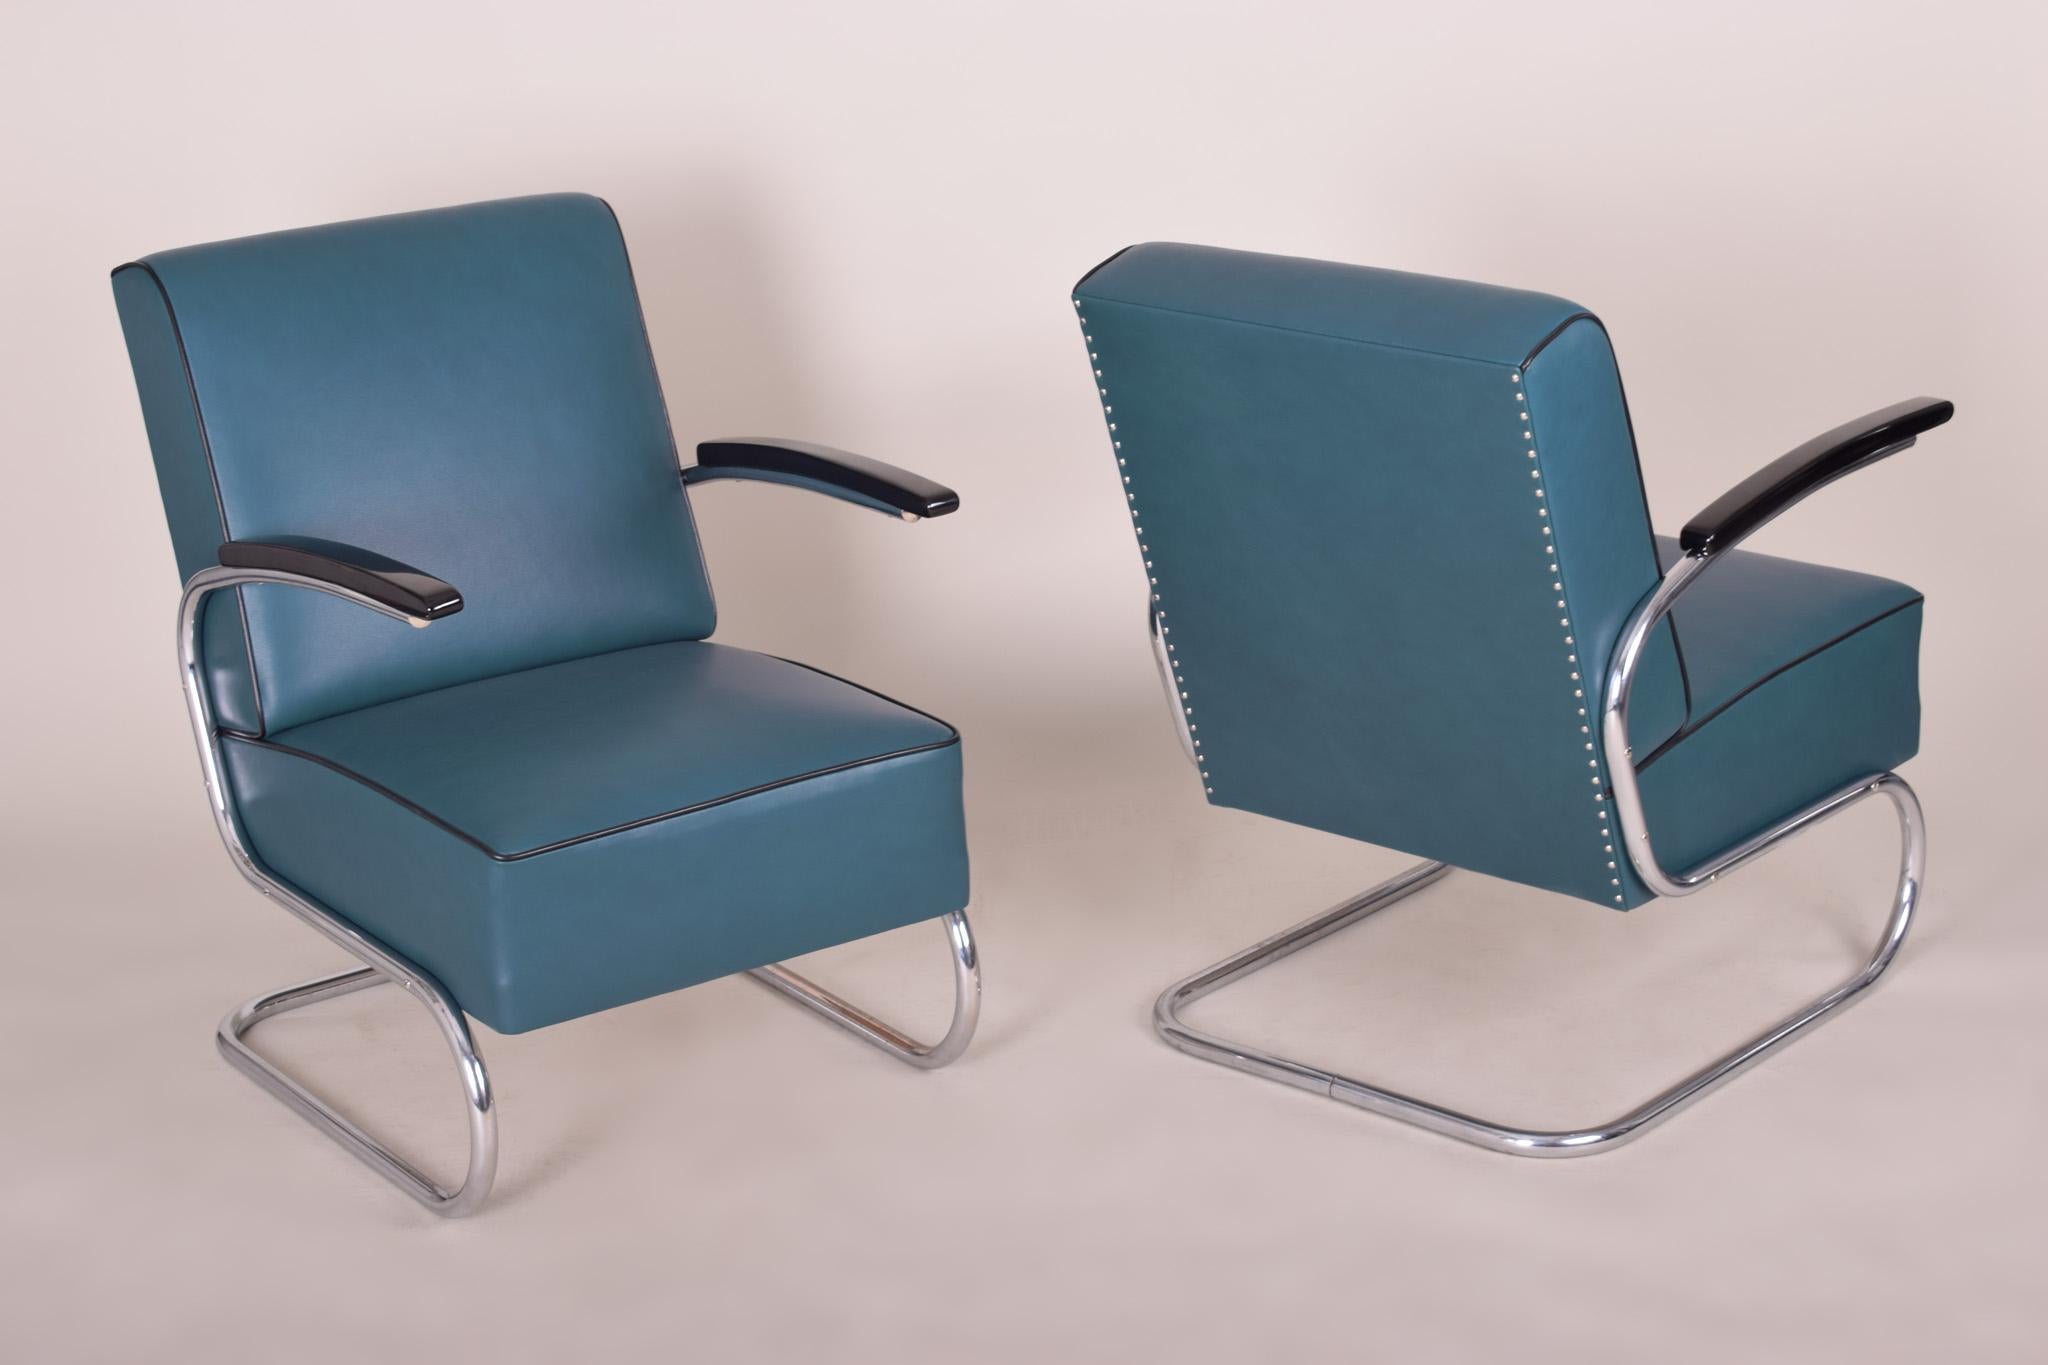 4 Tubular Steel Cantilever Armchairs in Art Deco, Chrome, New Blue Leather For Sale 4